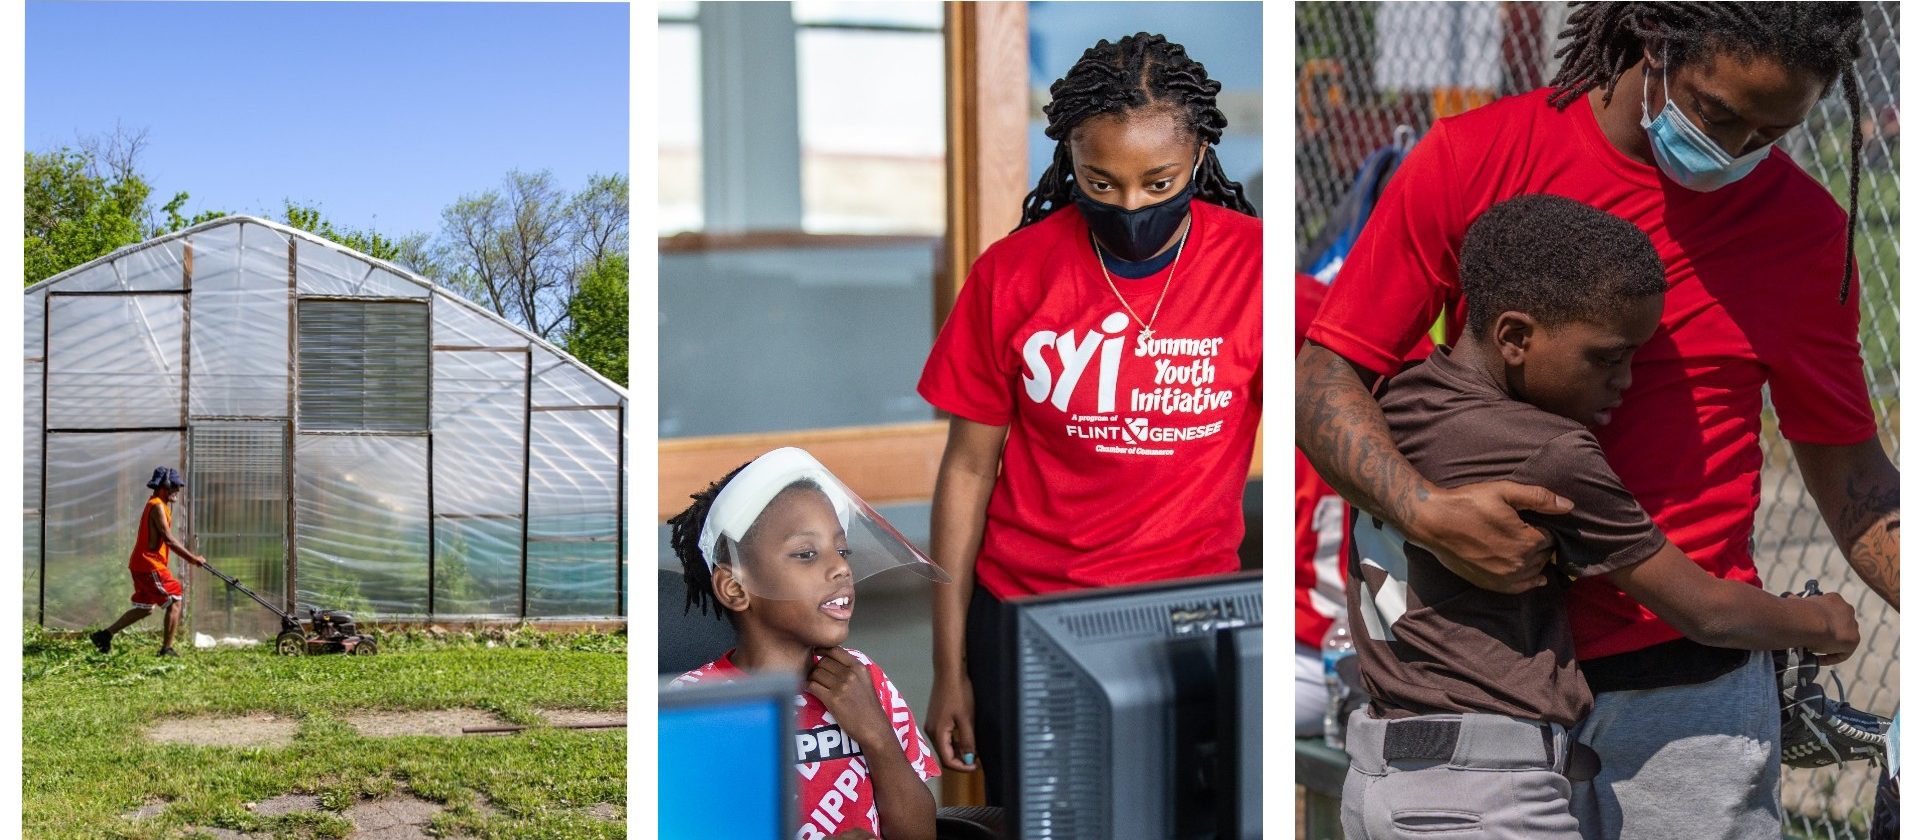 Triptych of three grant-funded programs: a man mowing a lot, a student working with another student at a youth program, and a father hugging his son at a baseball game